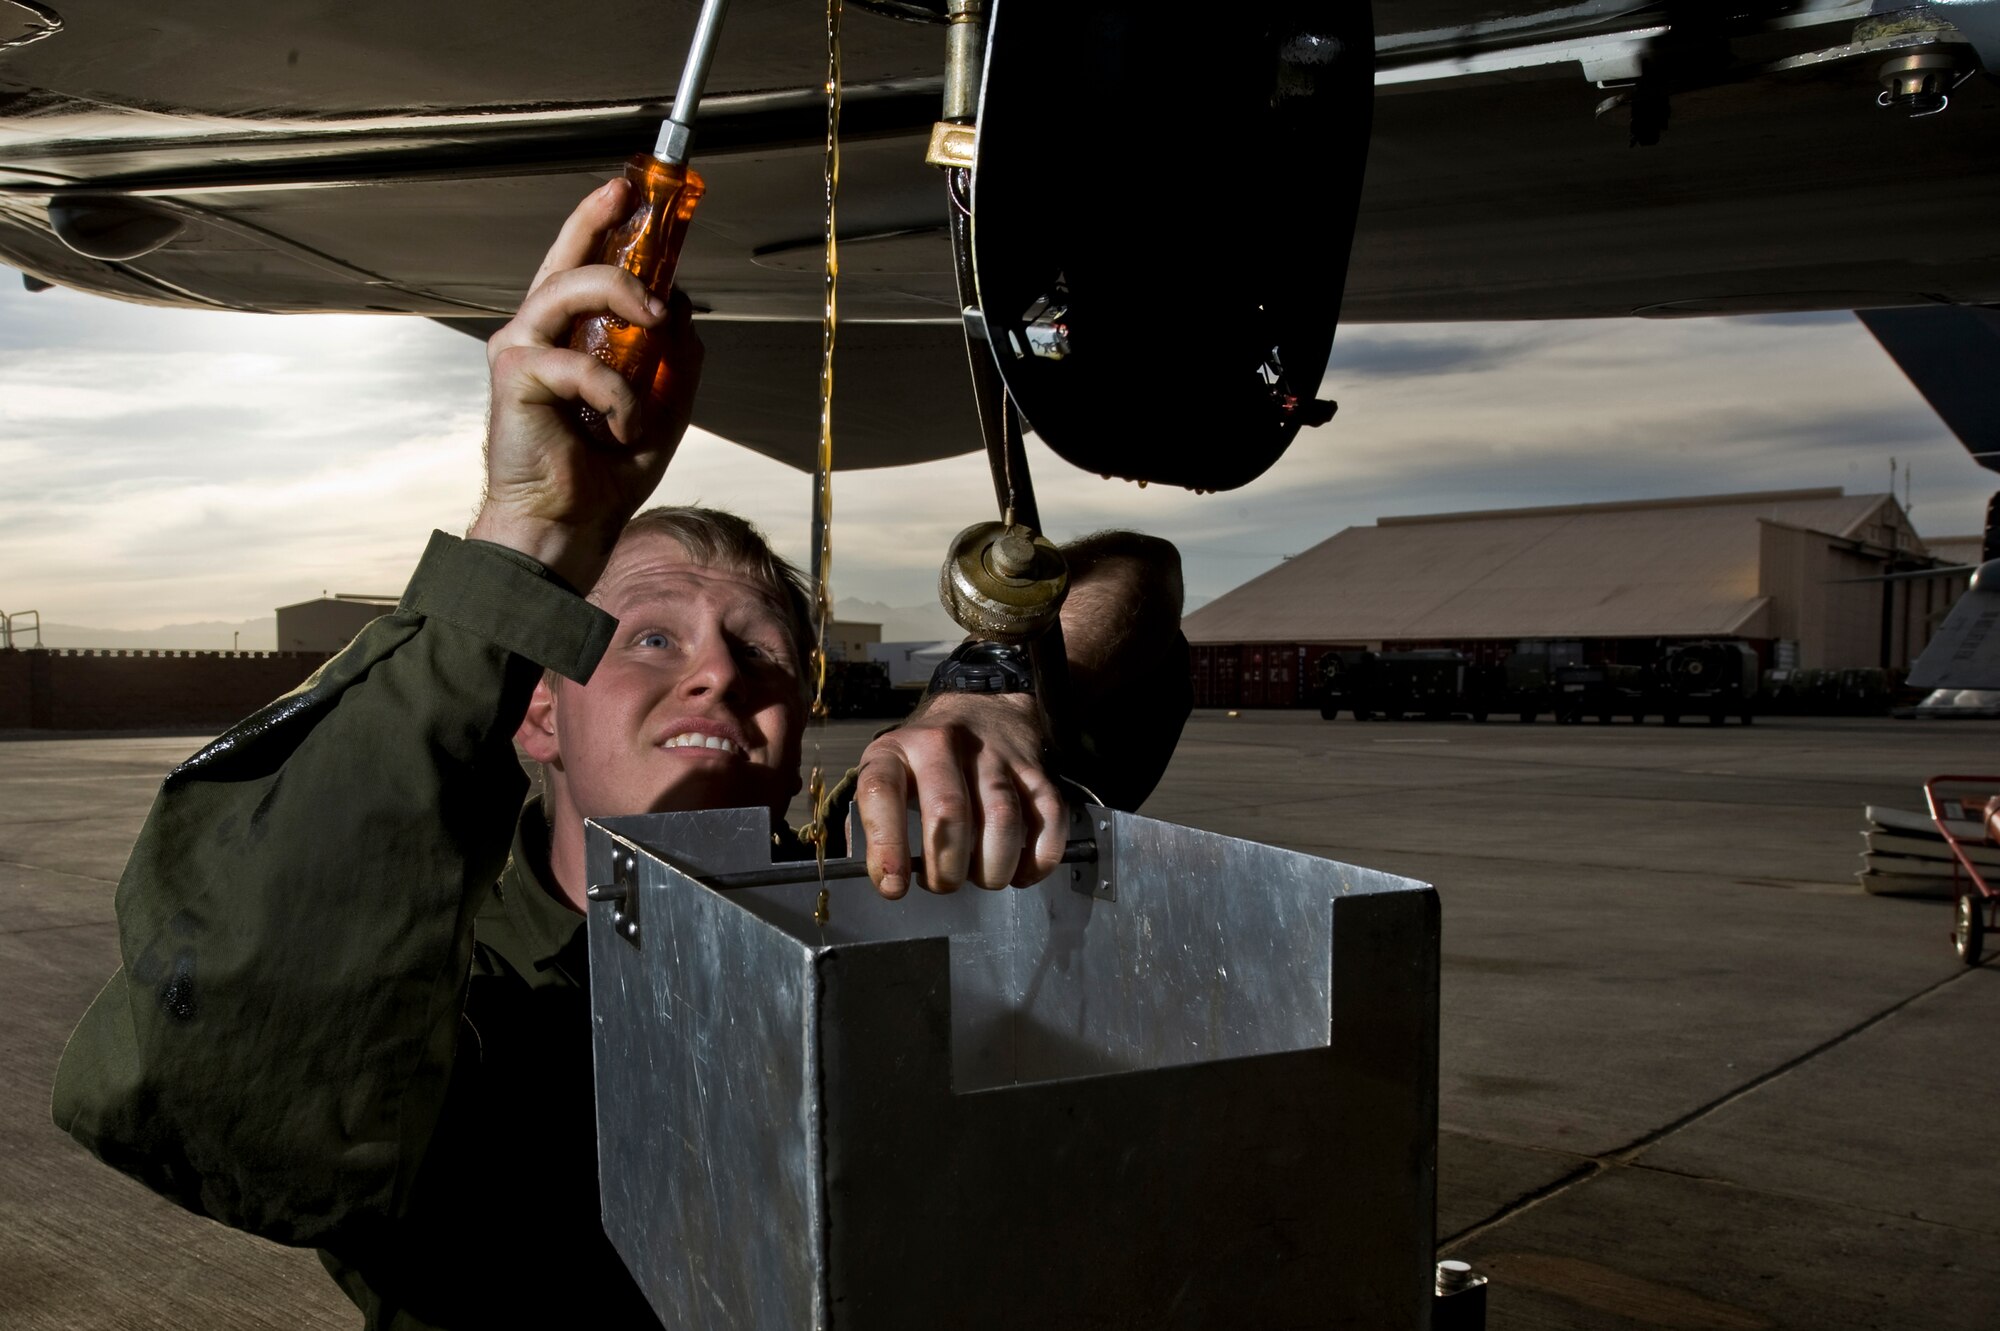 Royal Air Force of the United Kingdom Corporal Craig Godbolo, 2nd Army Cooperation Squadron, avionics technician, RAF Marham, replenishes oil on a GR4 Tornado, during Red Flag 12-3 March 5, 2012, at Nellis Air Force Base, Nev. Red Flag is a realistic combat training exercise involving the air forces of the United States and its allies.(U.S. Air Force photo by Airman 1st Class Daniel Hughes)